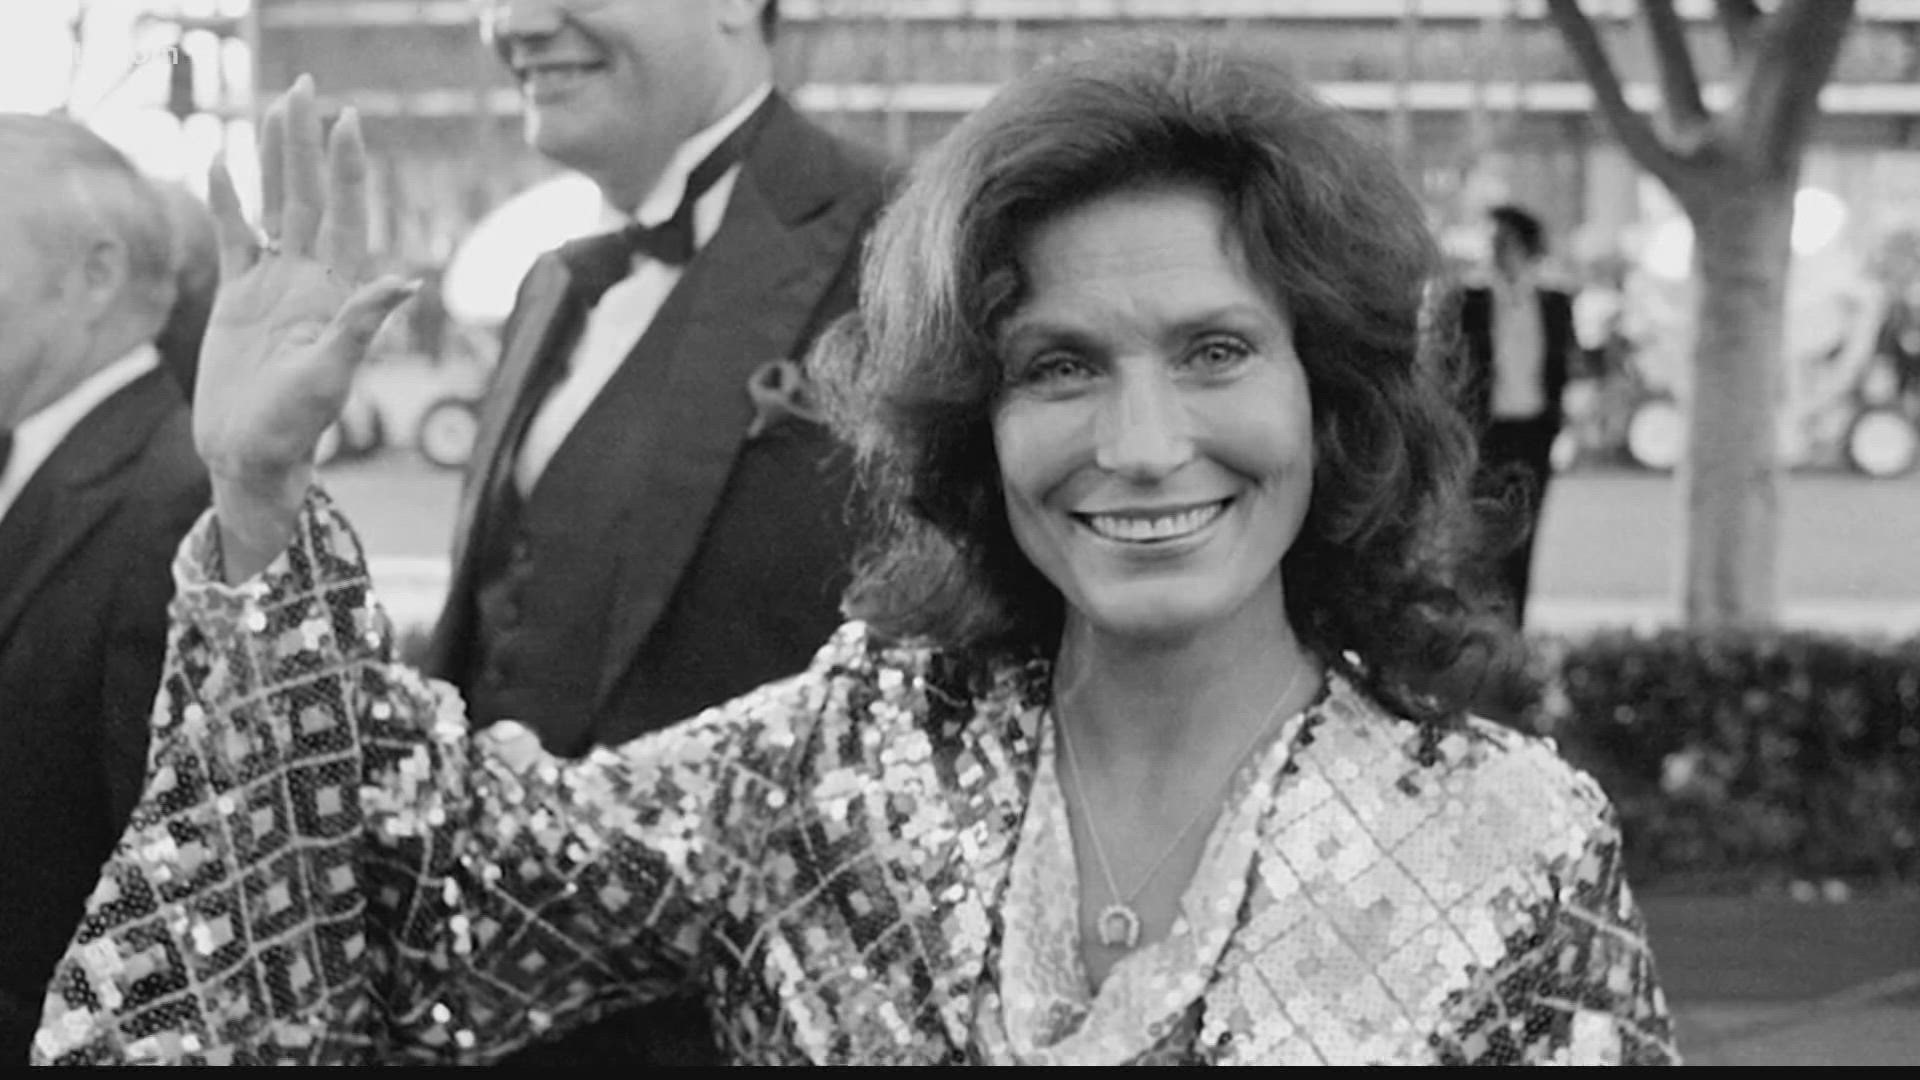 Loretta Lynn, the Kentucky coal miner's daughter whose songs about life and love as a woman in Appalachia touched many, has died.